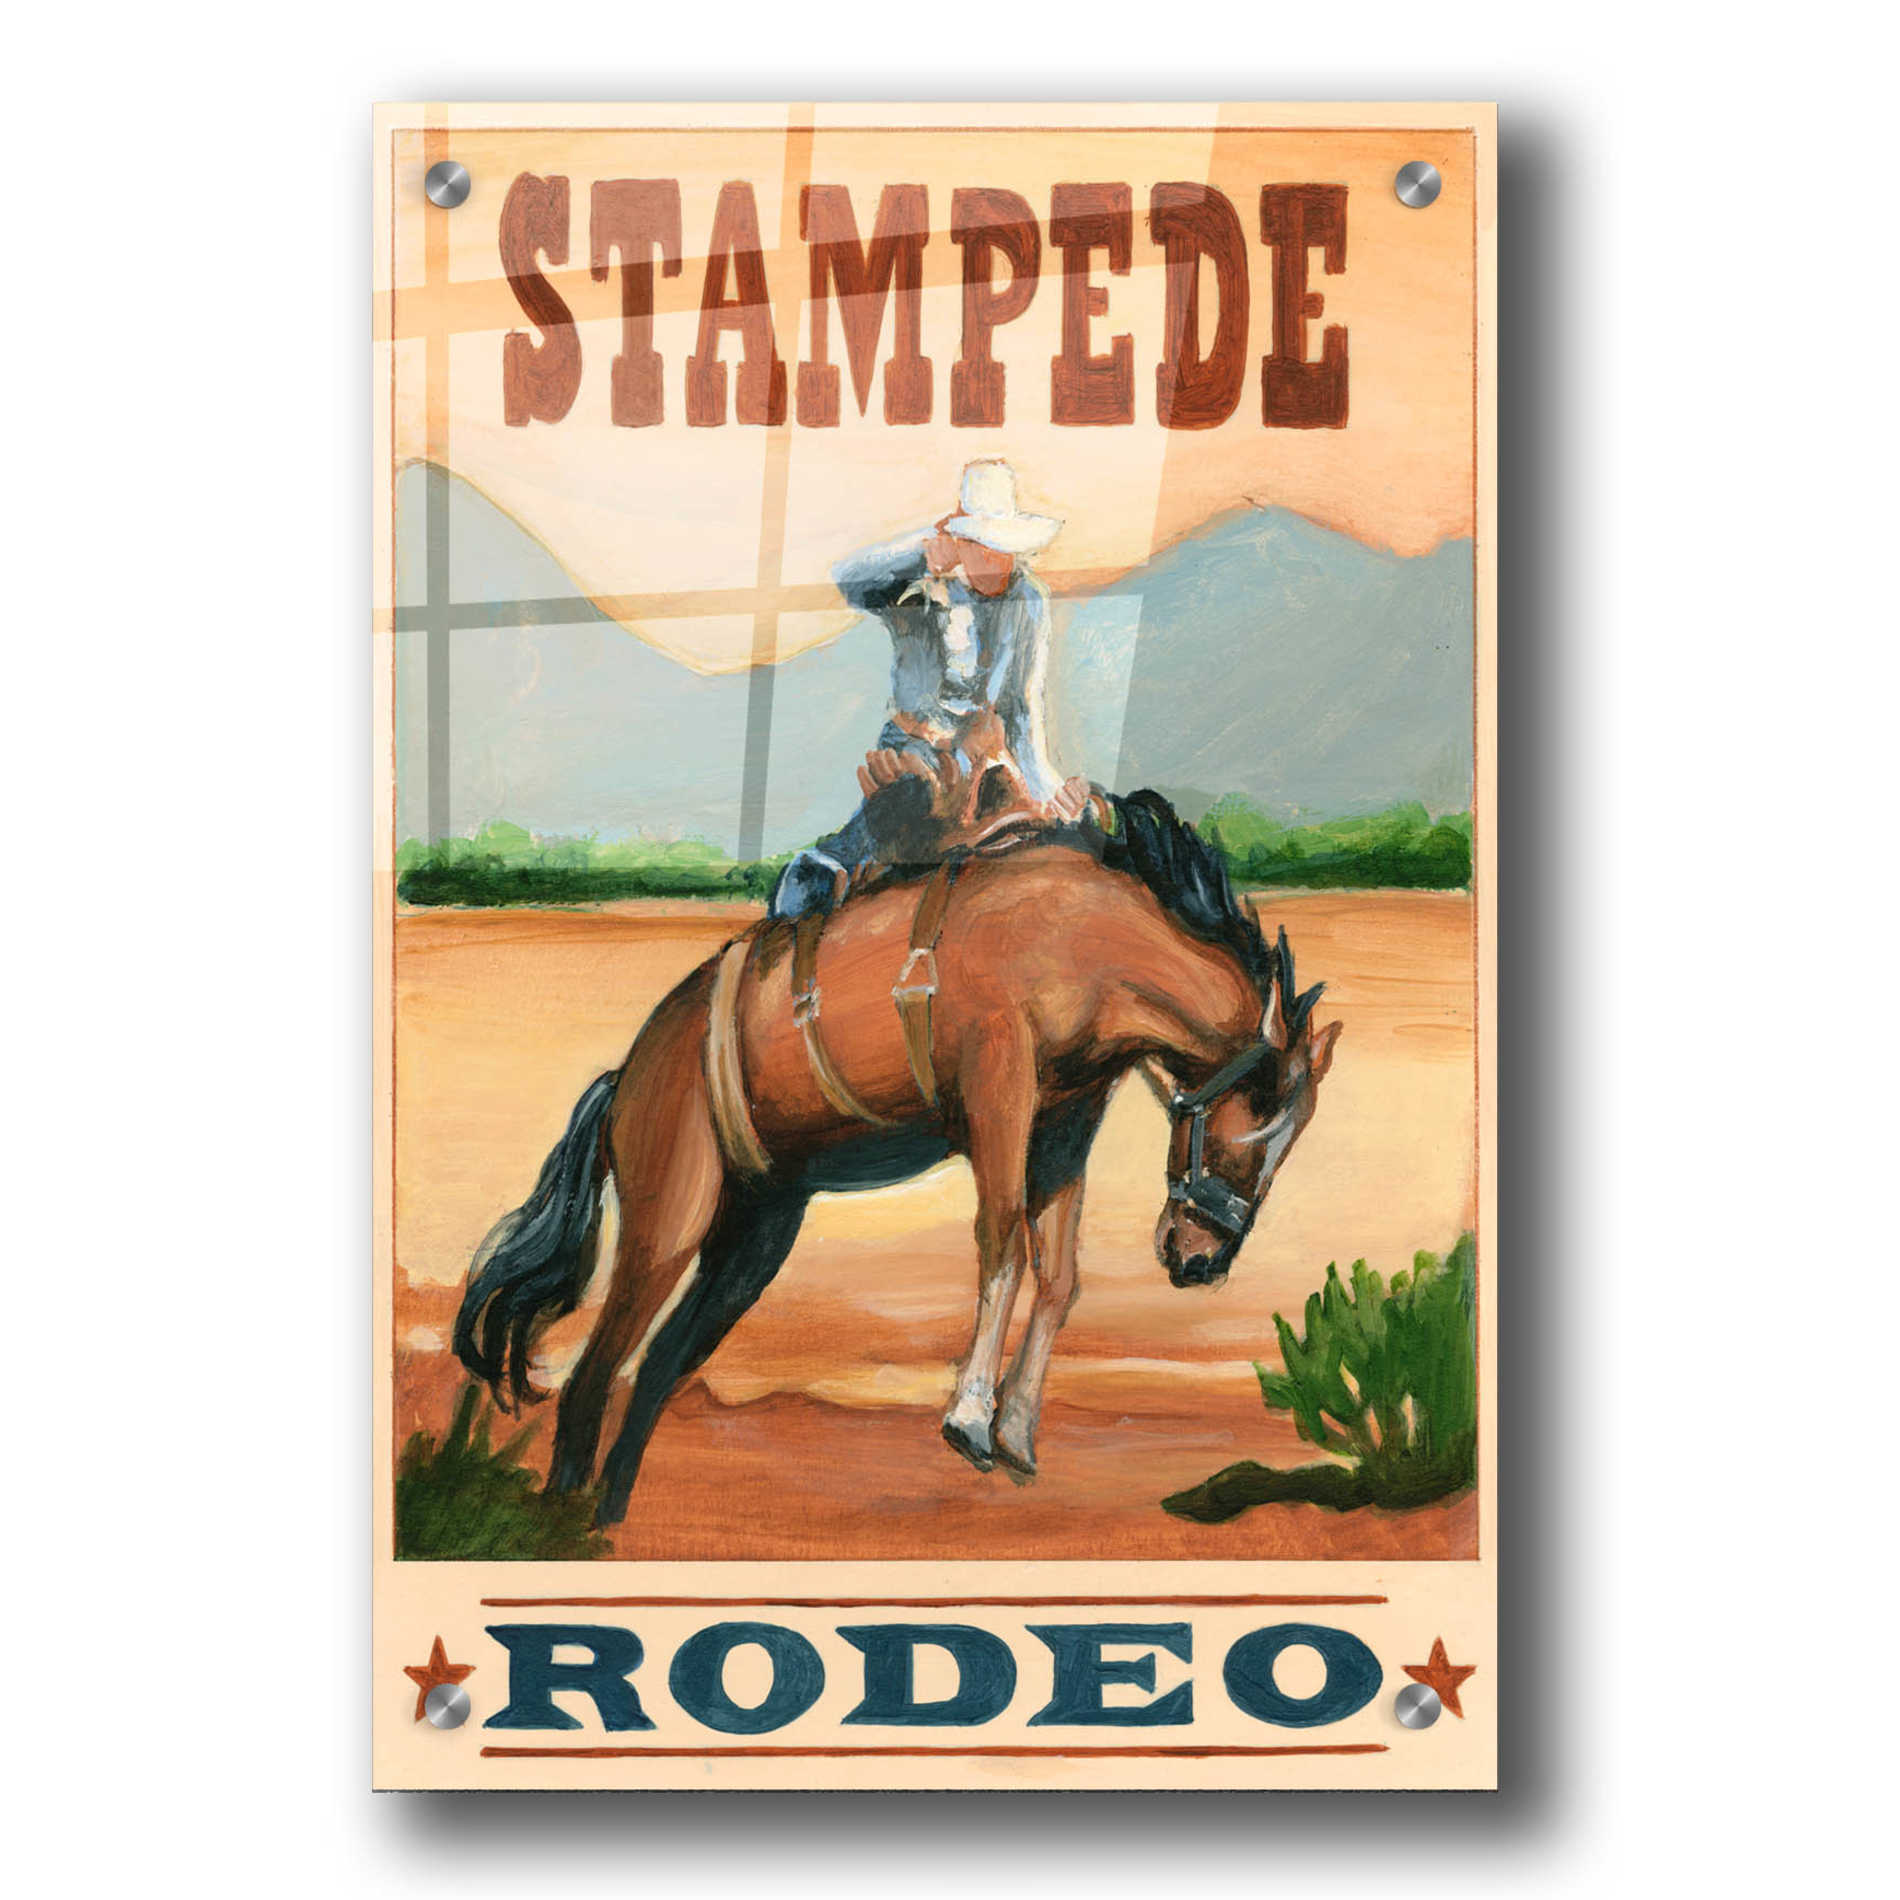 Epic Art 'Stampede Rodeo' by Ethan Harper, Acrylic Glass Wall Art,24x36